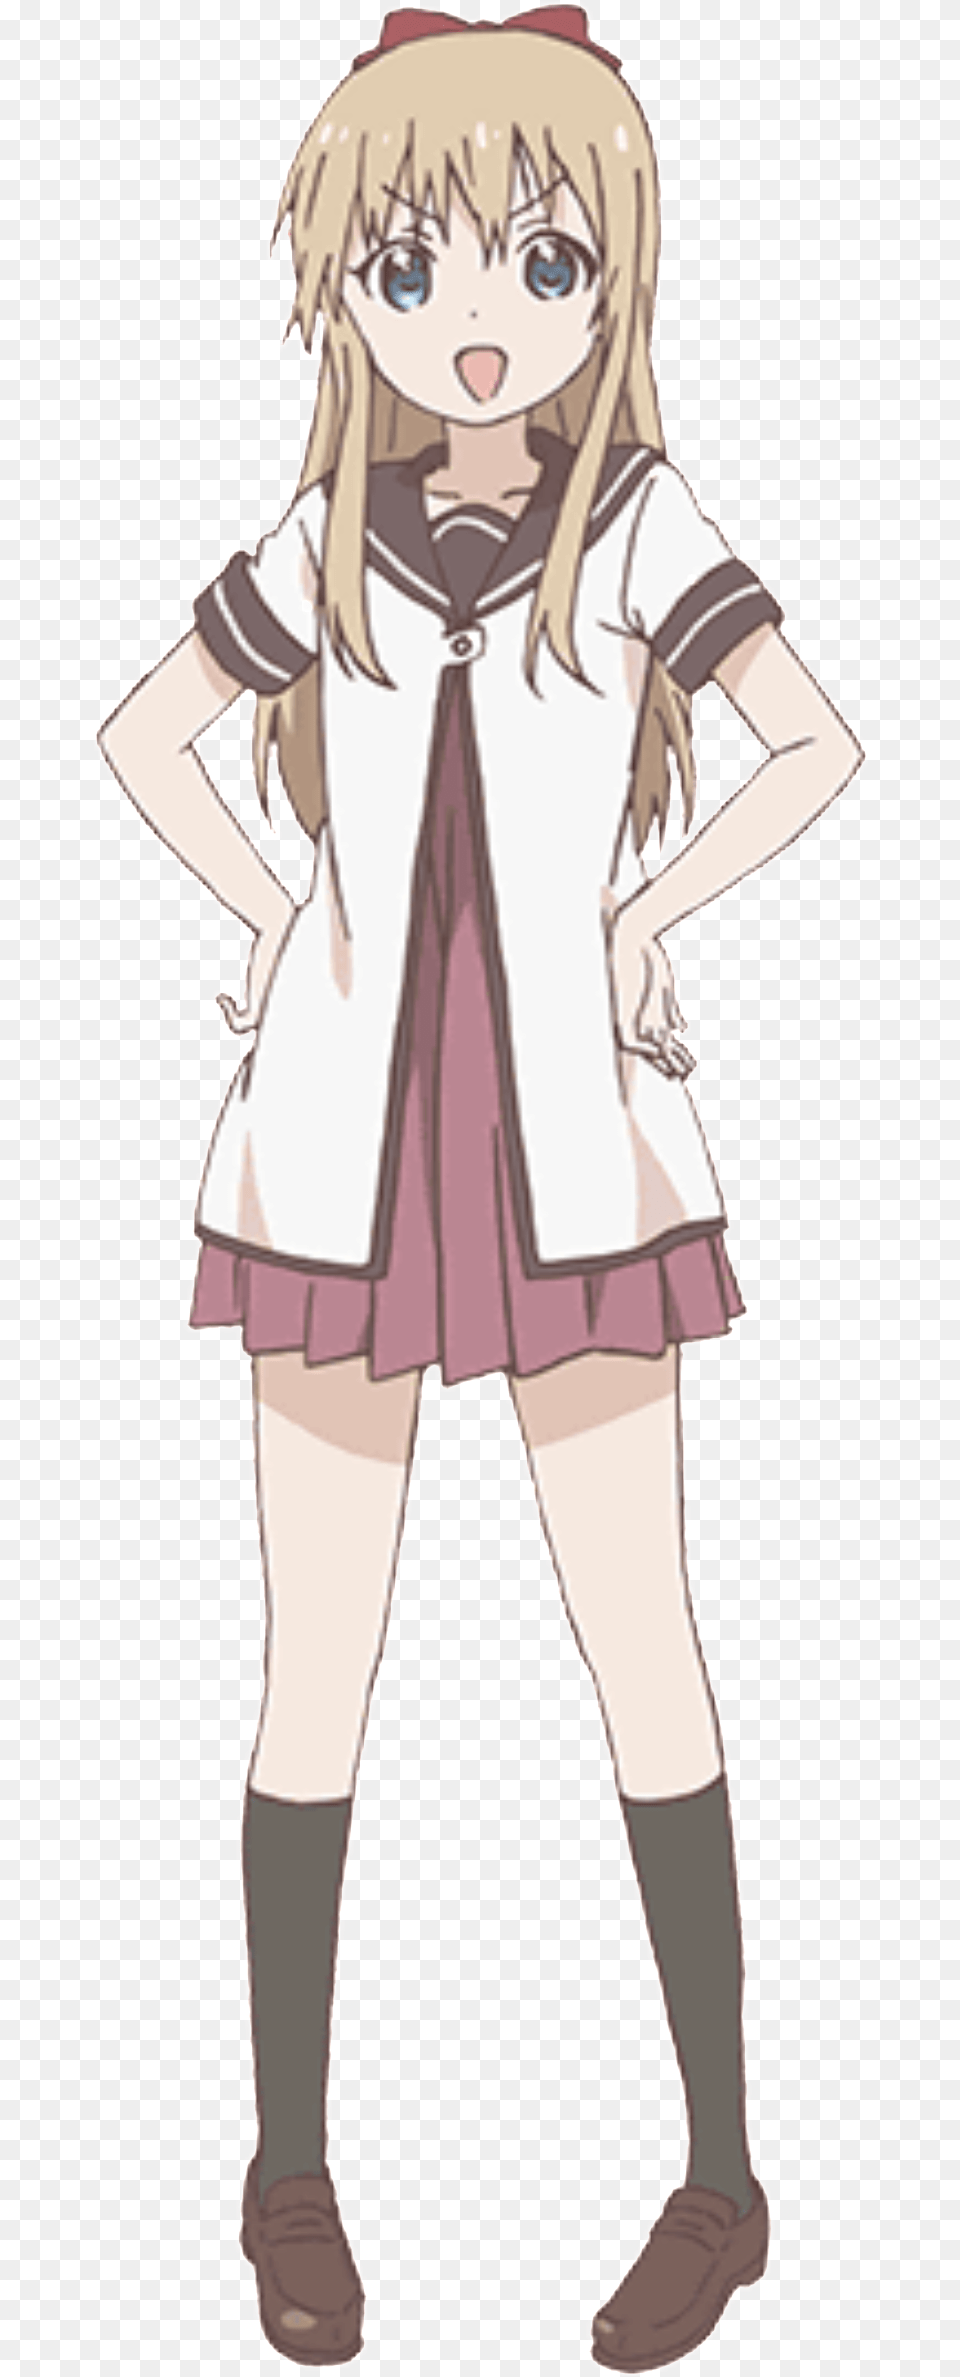 All Worlds Alliance Wiki Character Model Sheet Anime, Book, Publication, Person, Girl Png